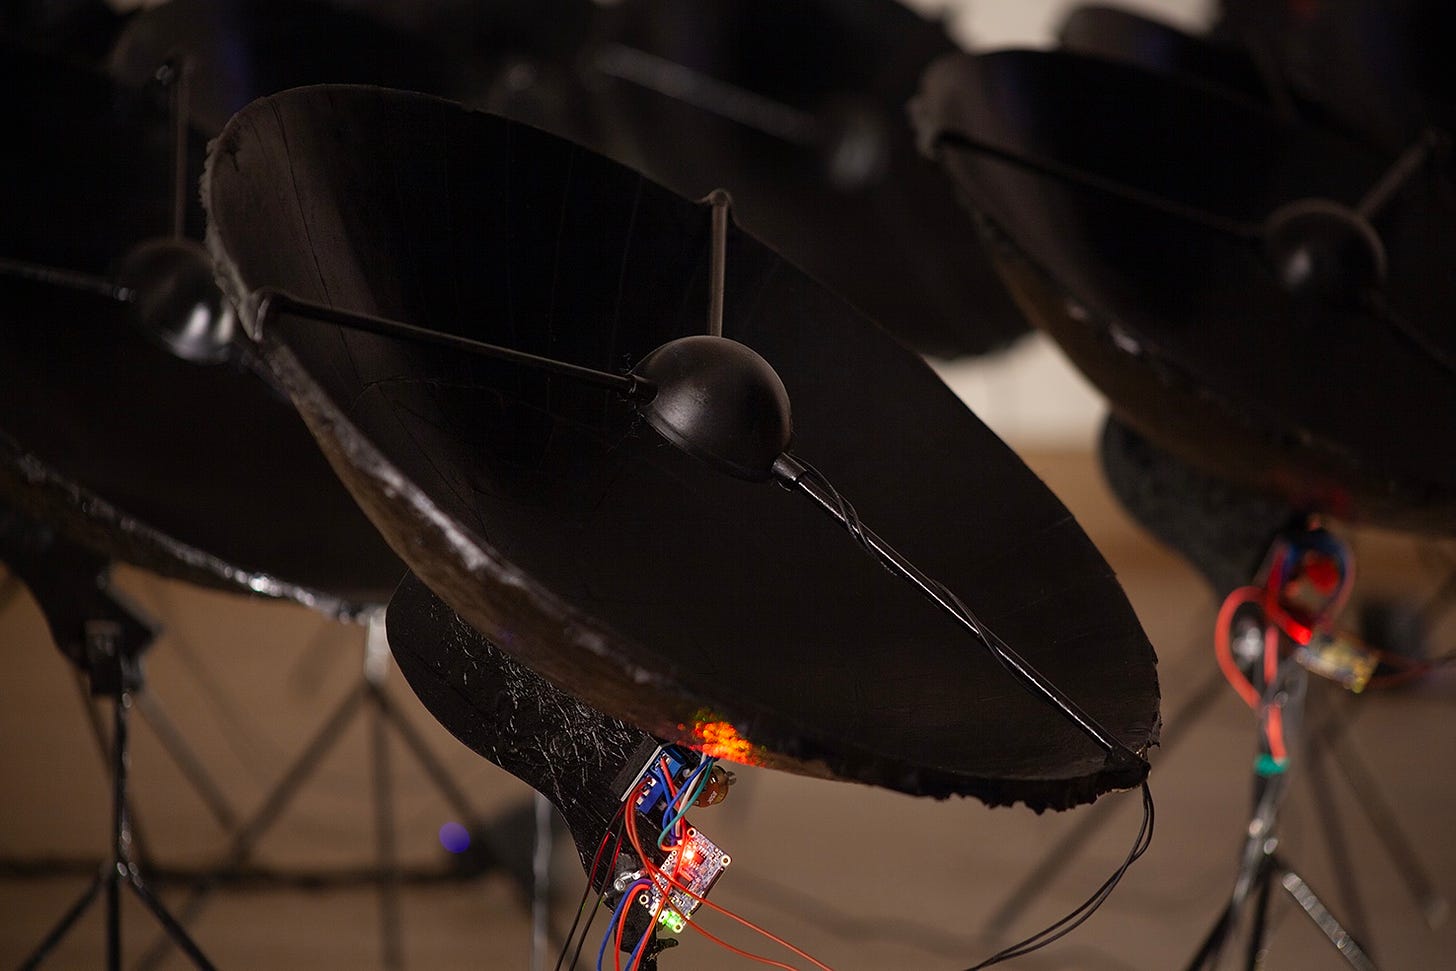 Close up view of one speaker. The speaker is shaped like a satellite dish and is painted black. beneath it the electronic components that make up the speaker and mp3 player are visible.